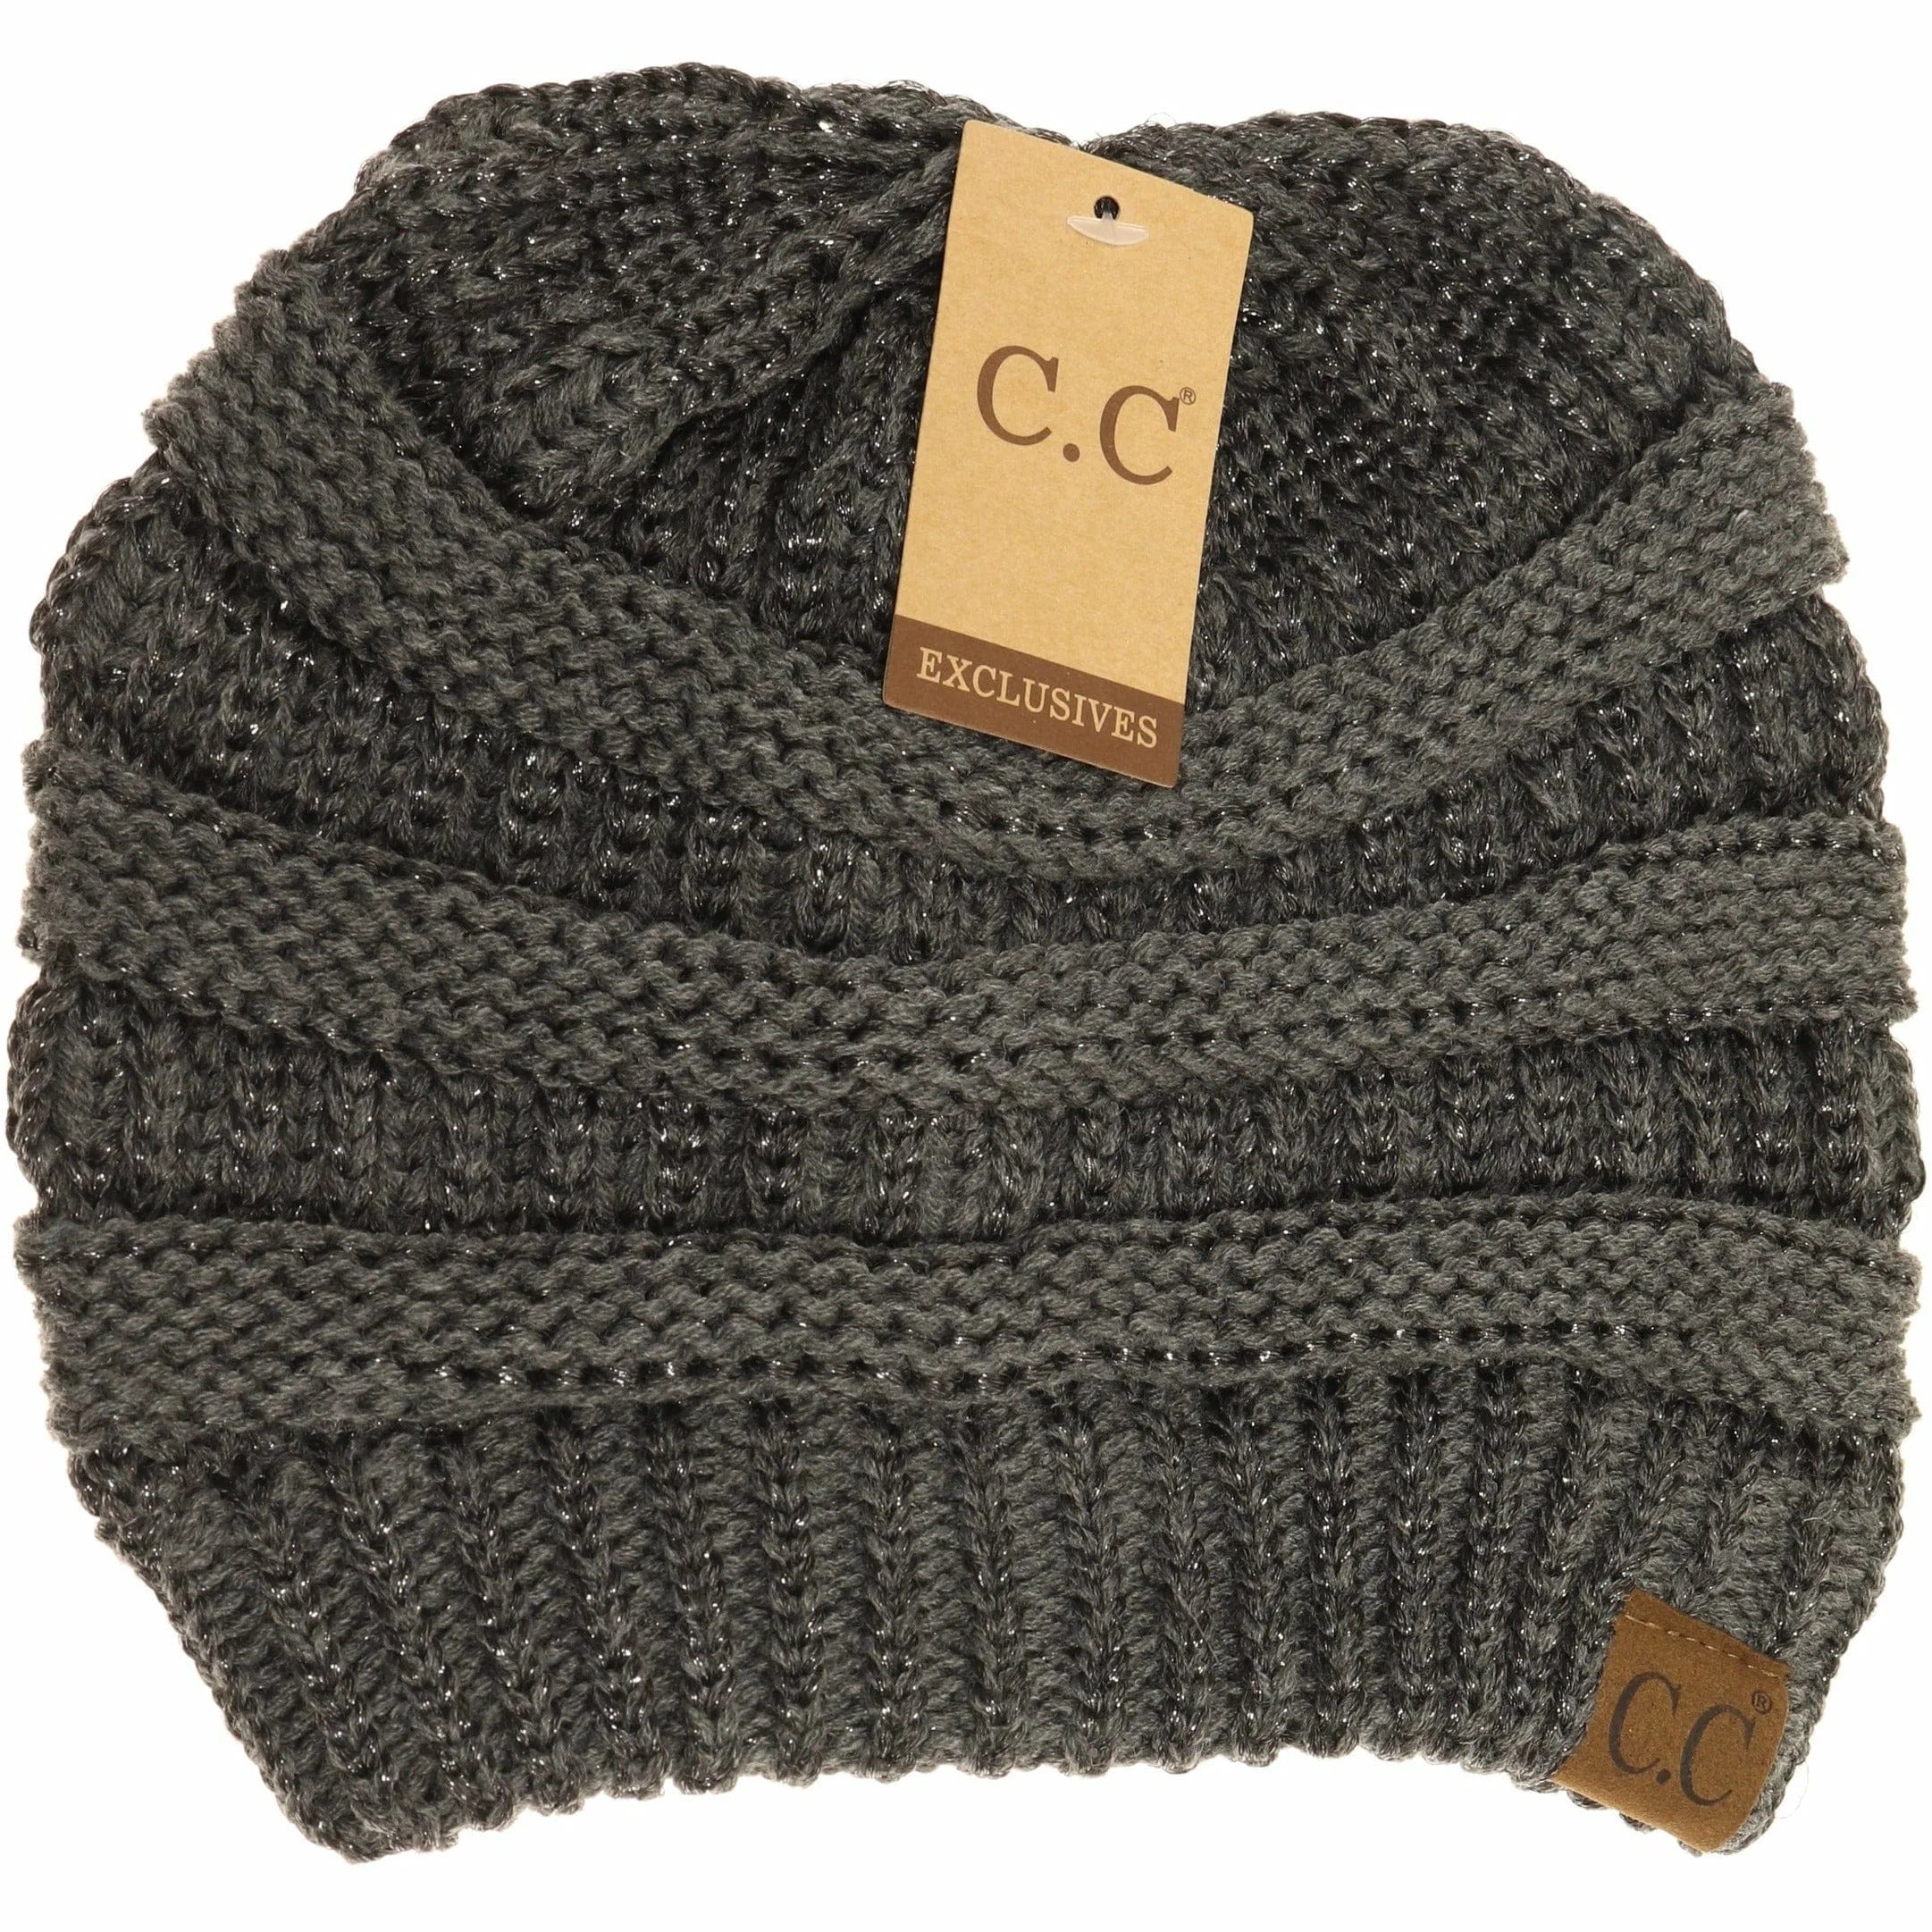 Knit CC Beanie with shimmering accents - Cowtown Bling N Things